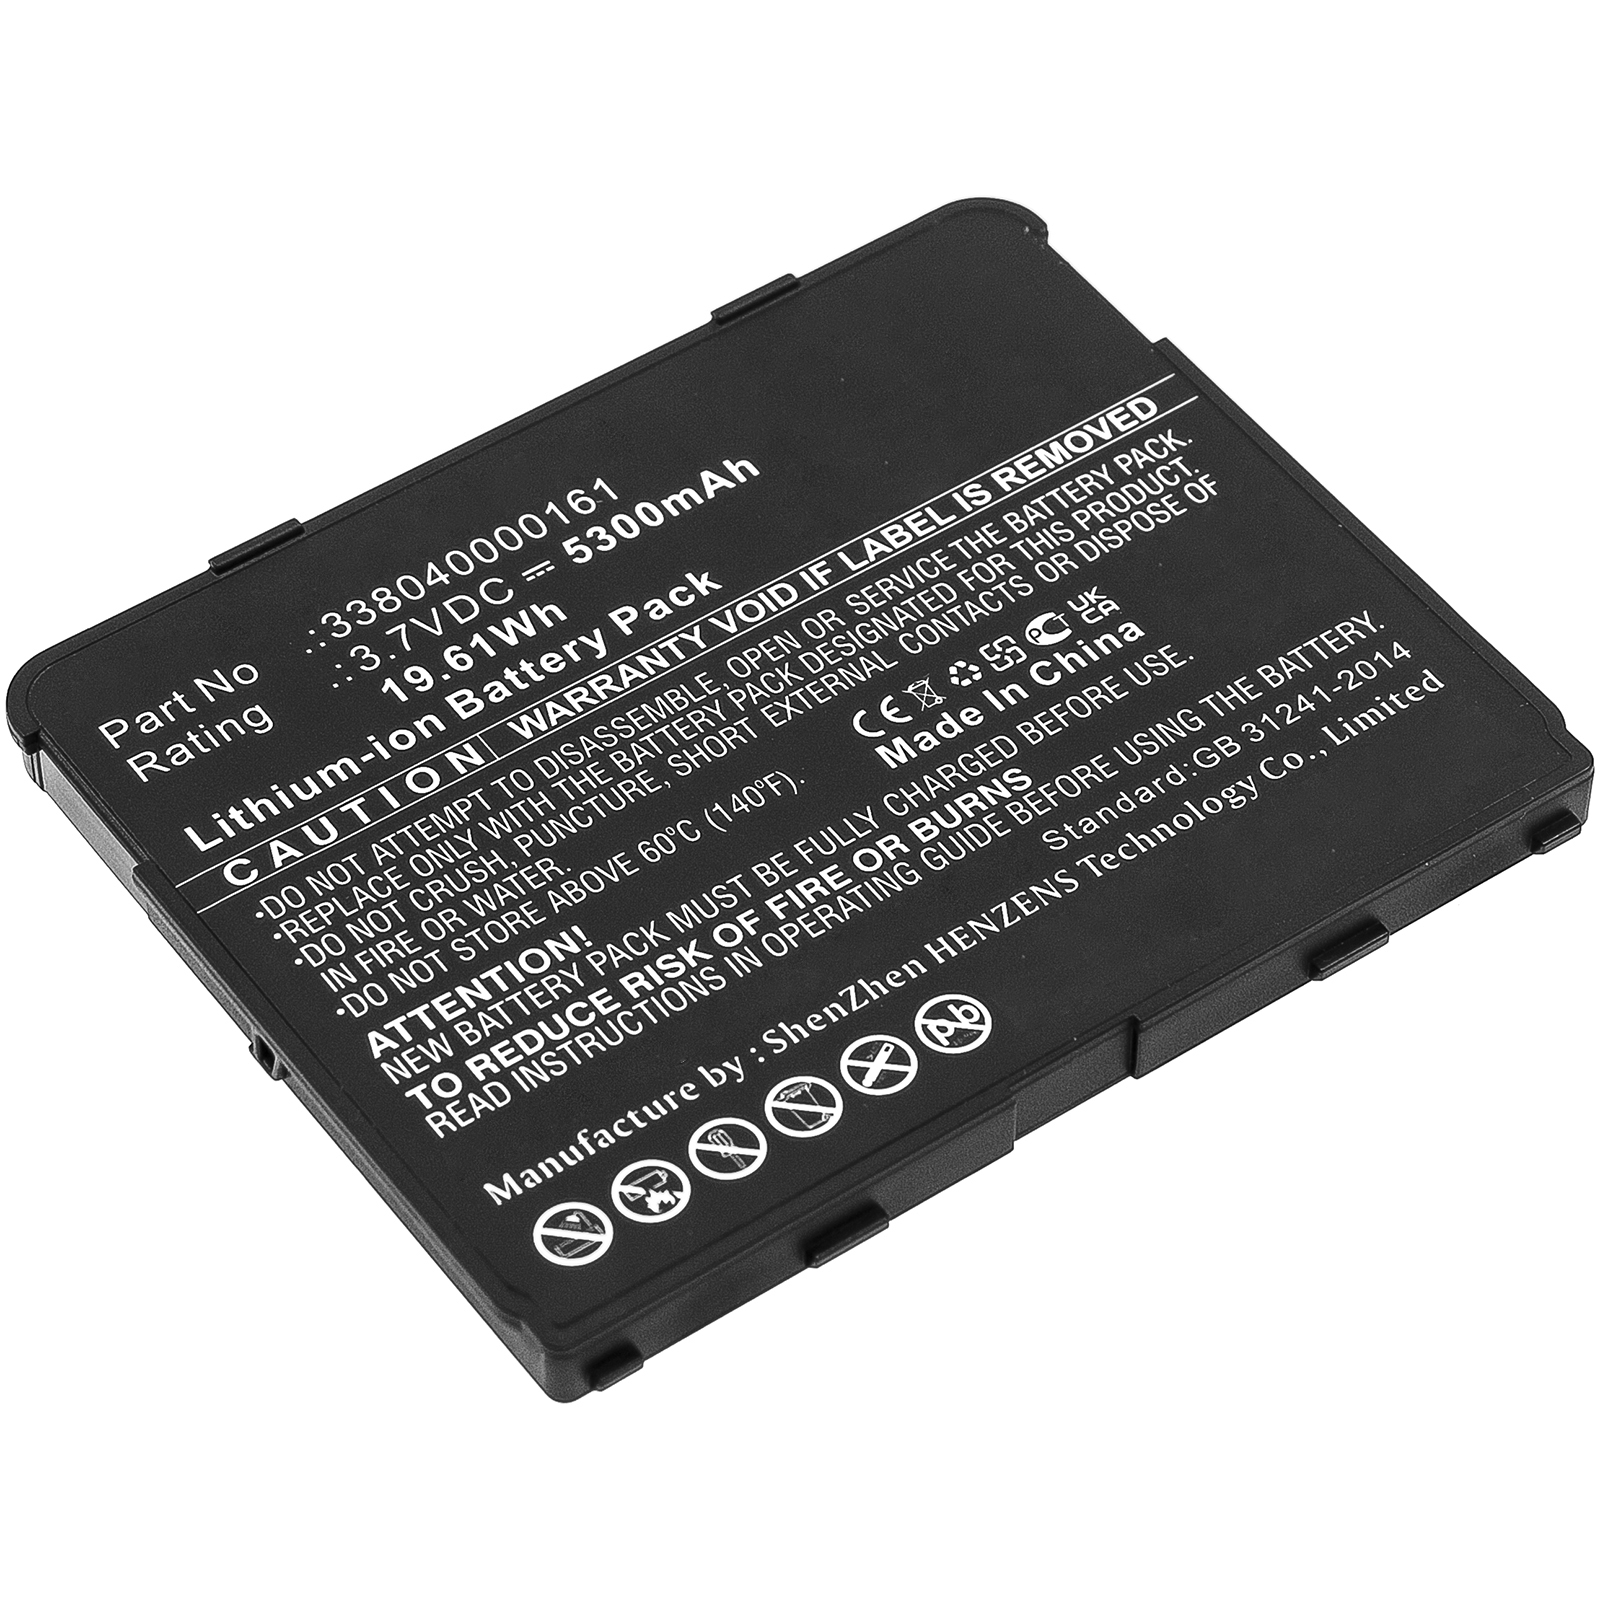 Synergy Digital Tablet Battery, Compatible with Matic 338040000161 Tablet Battery (Li-Pol, 3.7V, 5300mAh)